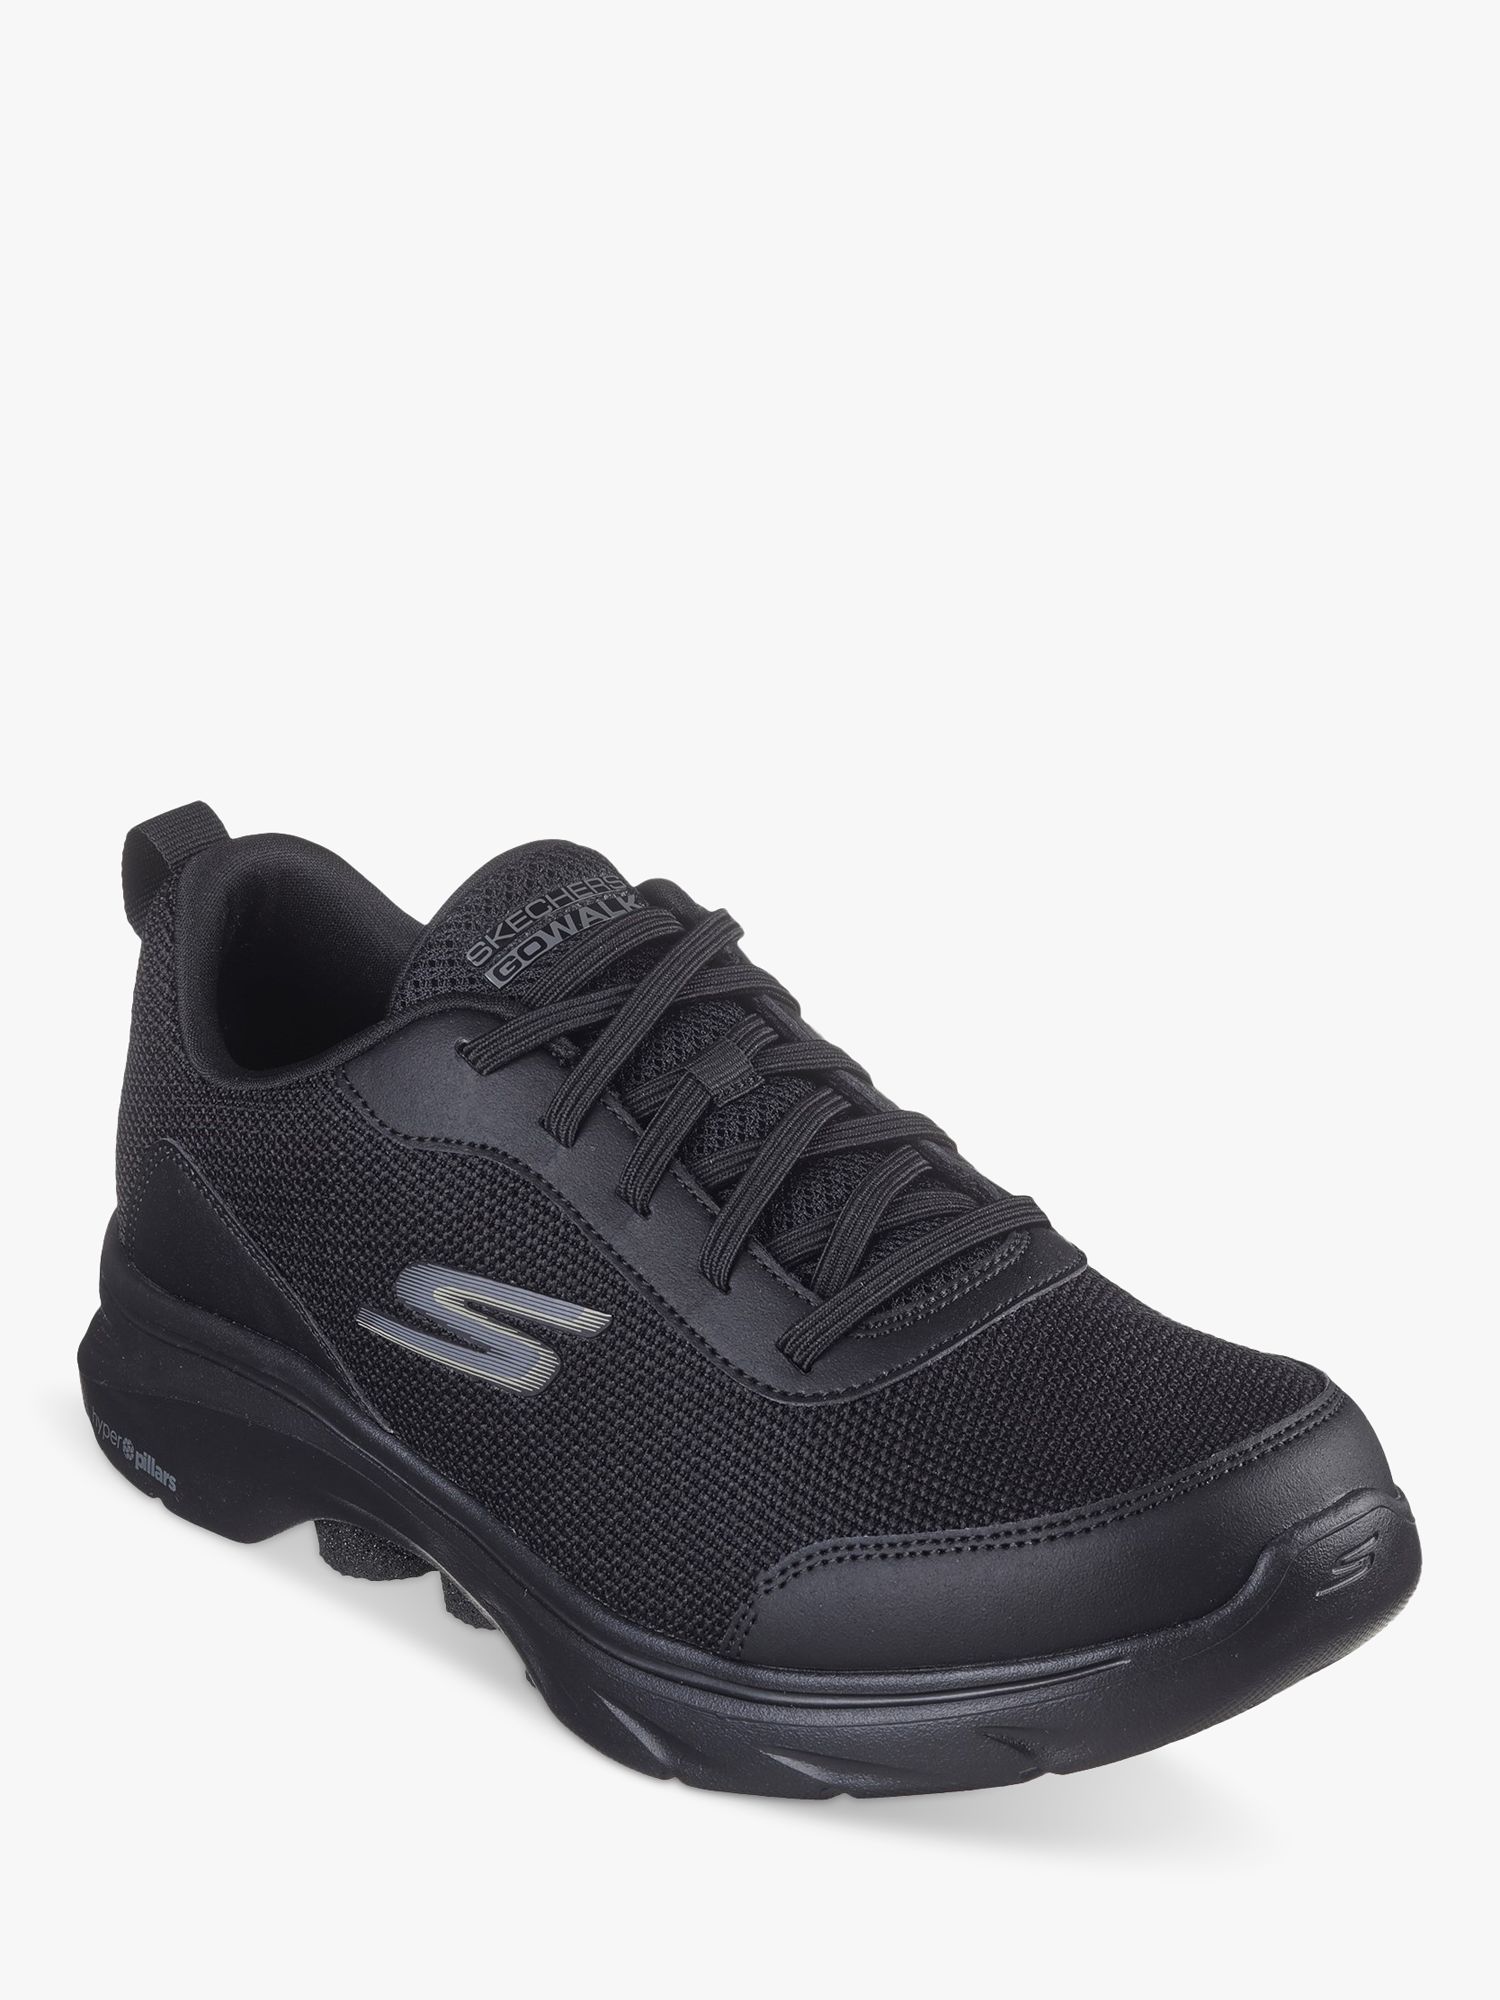 Buy Skechers Go Walk 7 Stretch Lace Trainers Online at johnlewis.com